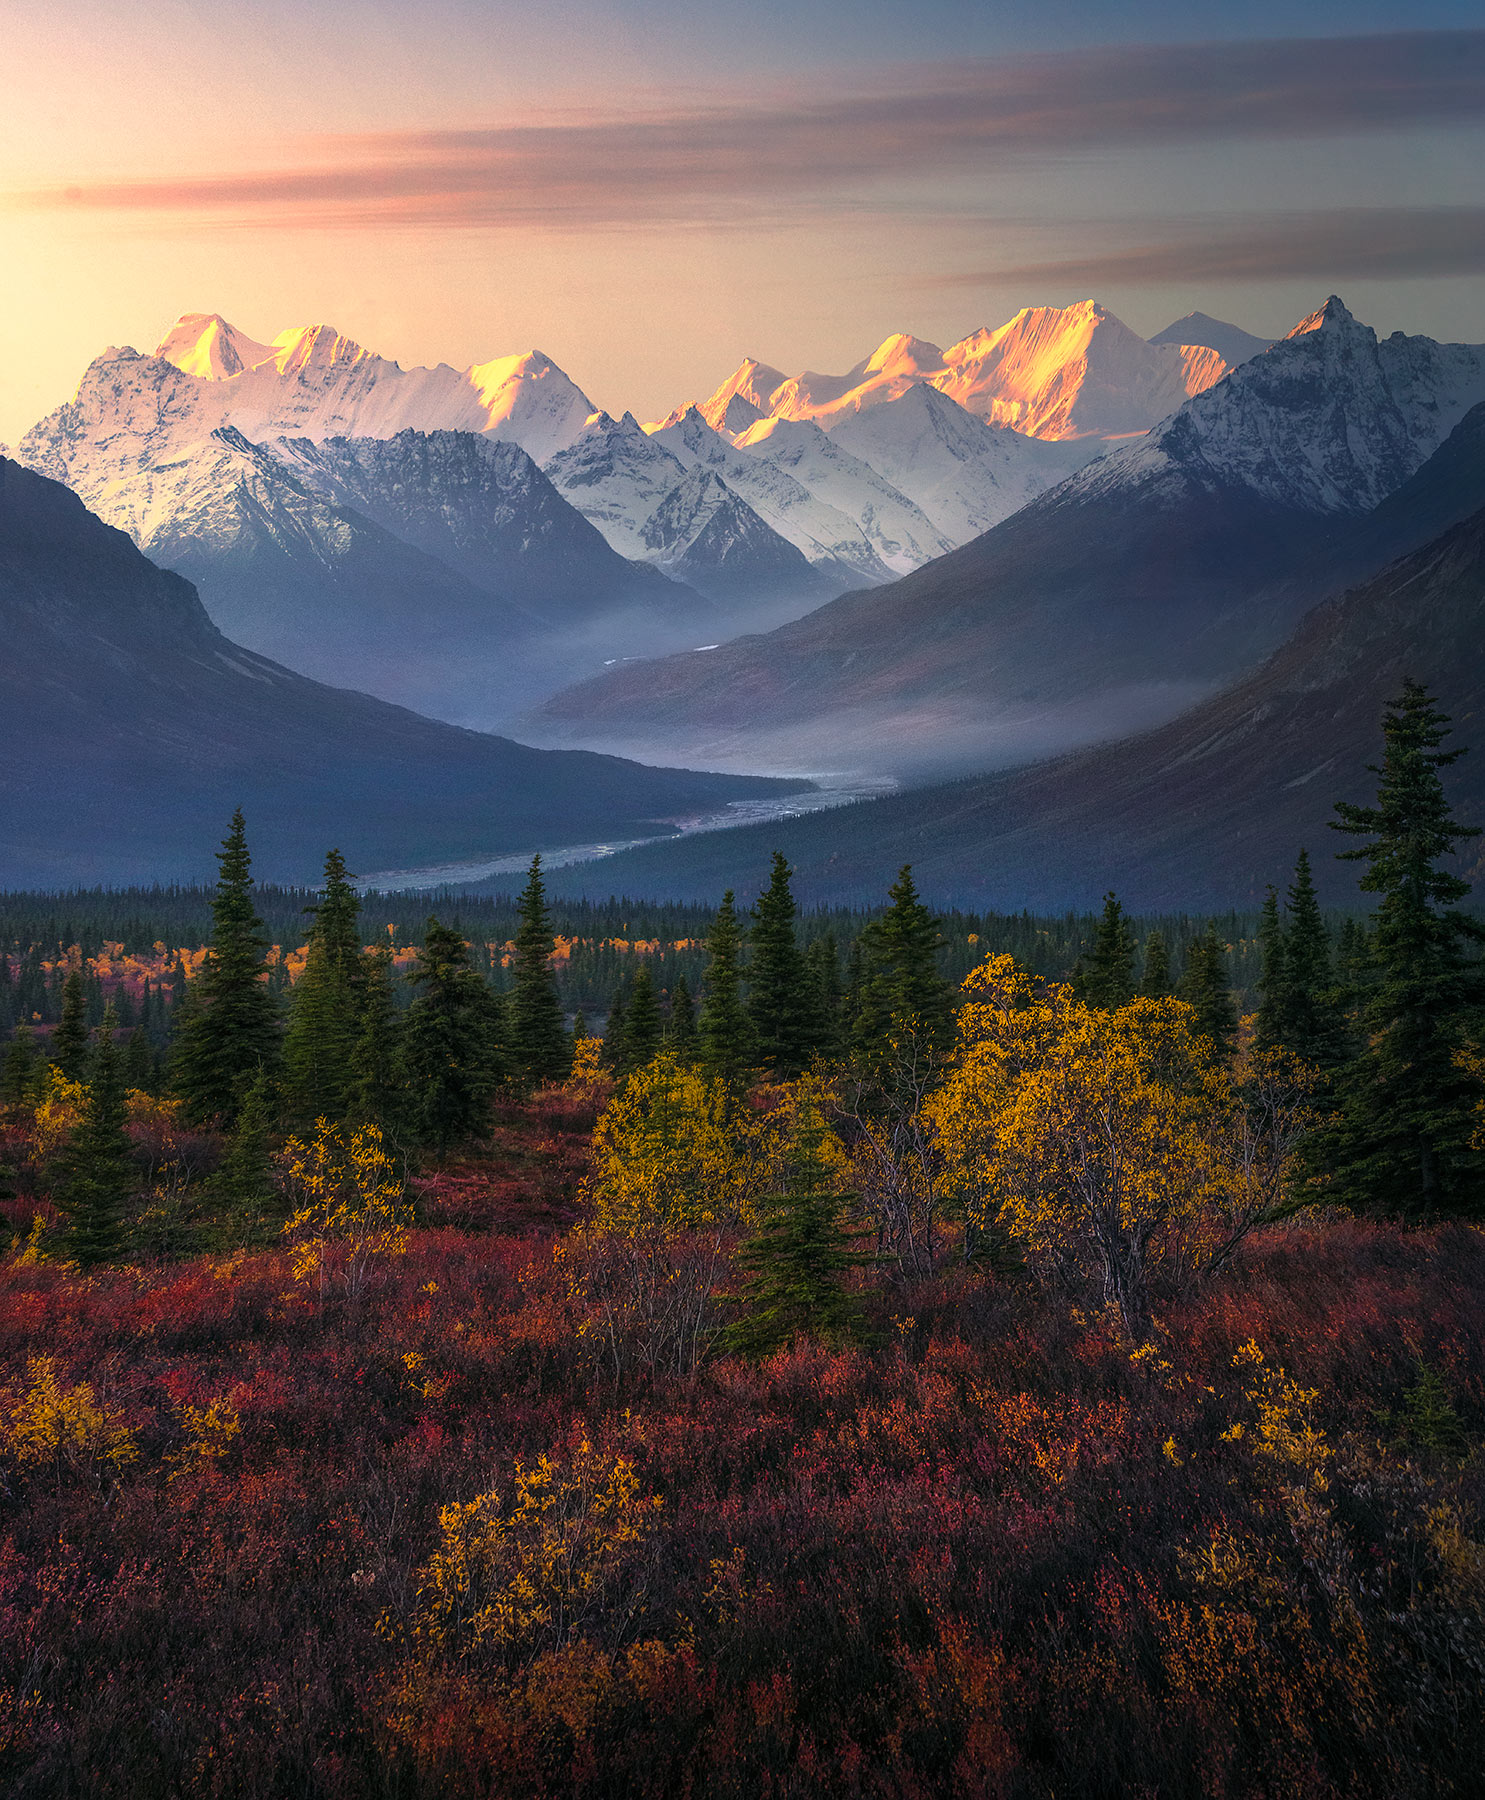 Beautiful morning light with the telephoto lens in Alaska.